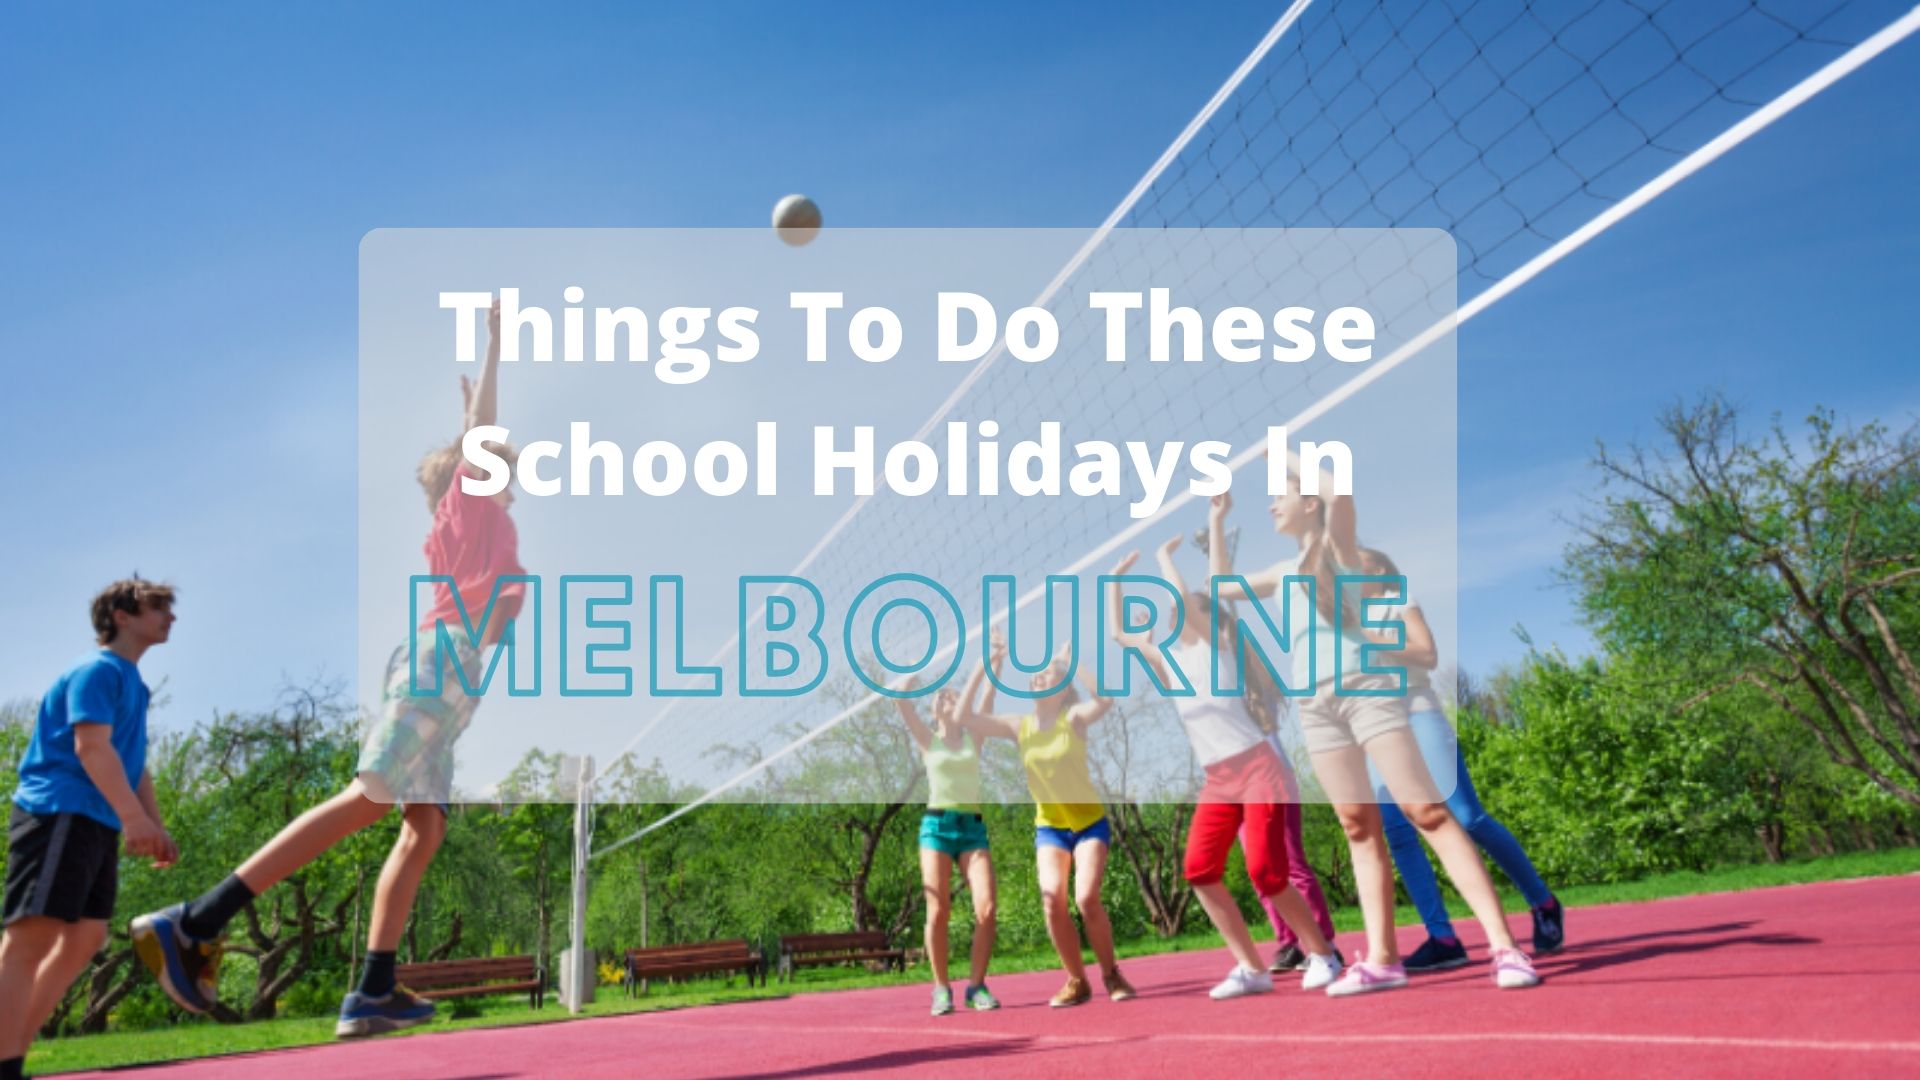 Fun Things To Do These School Holidays in Melbourne What's On 4 Kids